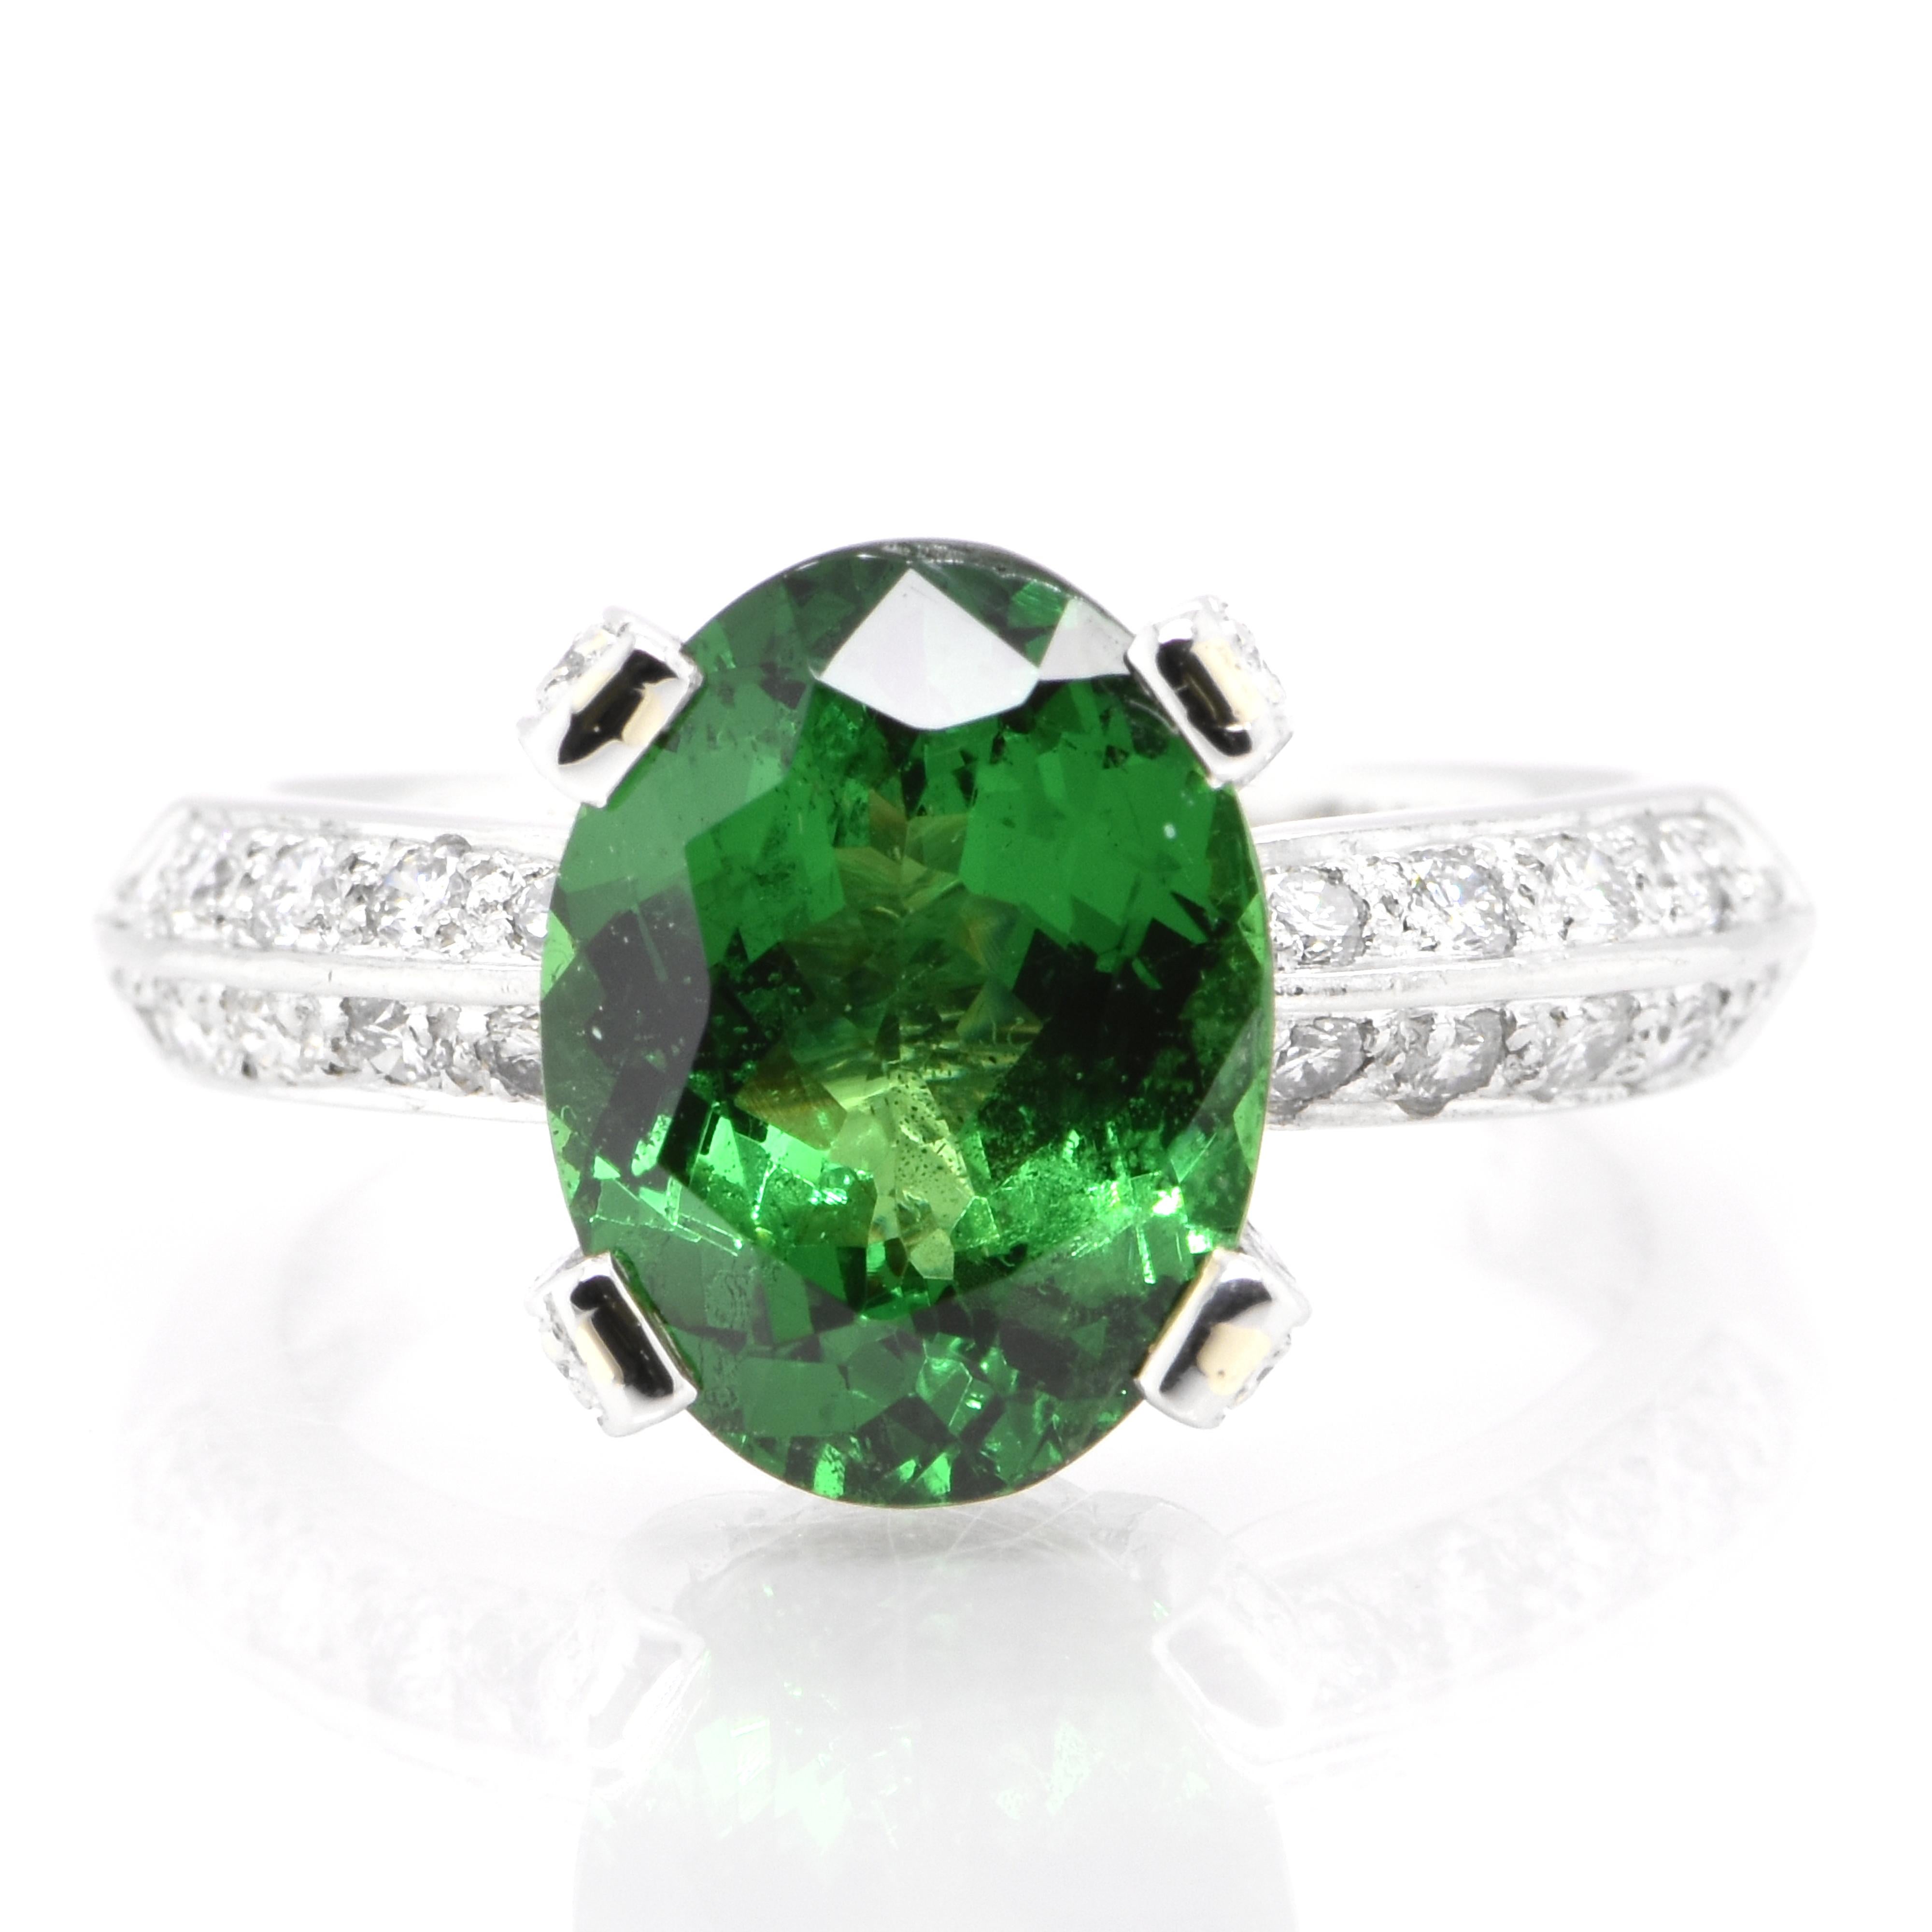 An absolutely gorgeous cocktail ring featuring a 4.62 Carat Tsavorite Garnet and 0.70 Carats of Diamond Accents set in Platinum. Garnets have been adorned by humans throughout history from Ancient Egypt, Rome and Greece. They come in a wide variety